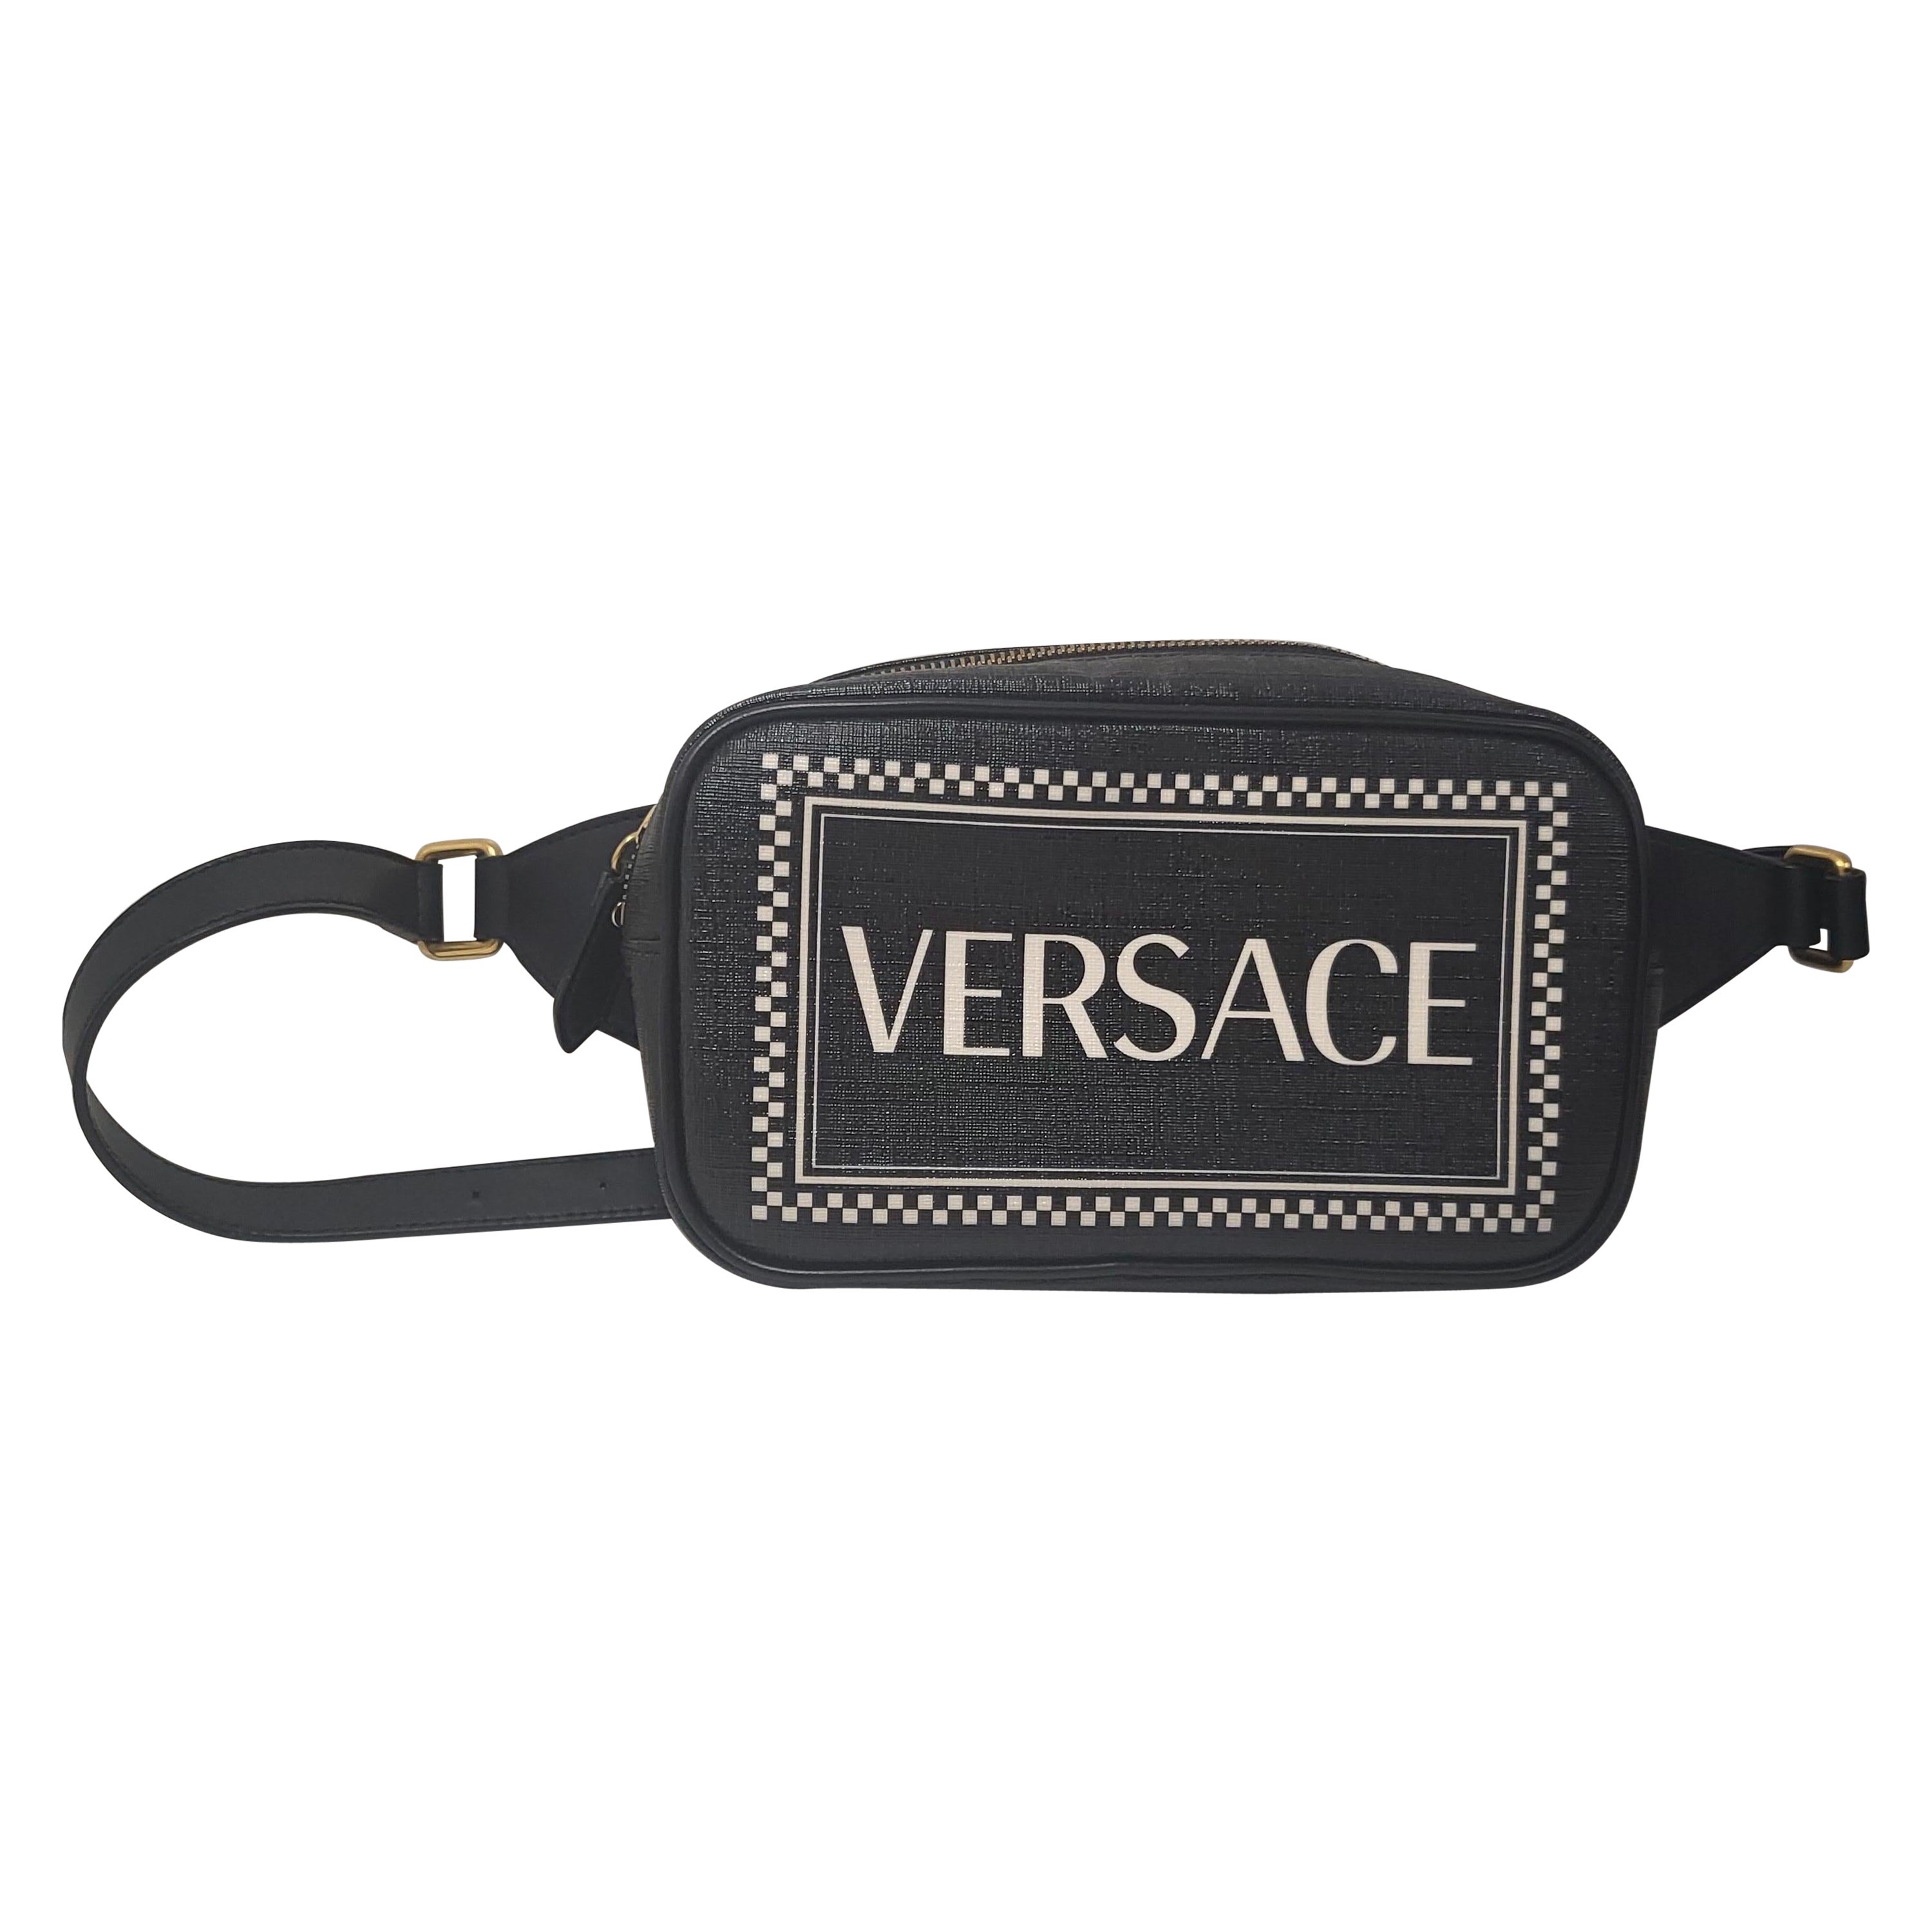 2019 VERSACE Black Leather with White Logo Waistbag Bumbag